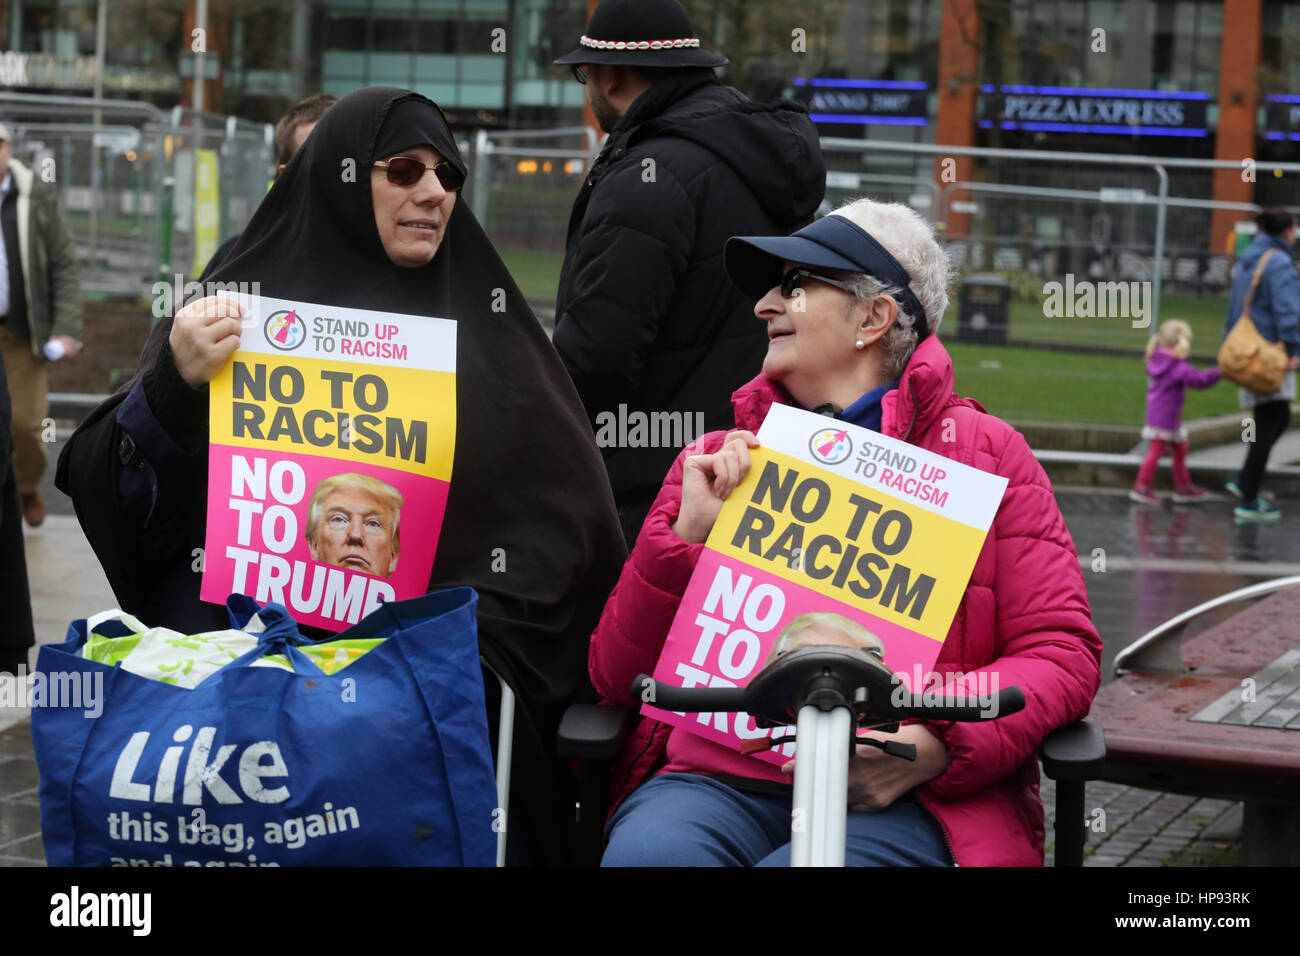 Manchester, UK. 20th February, 2017. Mariam khan and penny krantz with 'No to racism' placards, Piccadilly Gardens, Manchester,20th February, 2017 (C)Barbara Cook/Alamy Live News Stock Photo